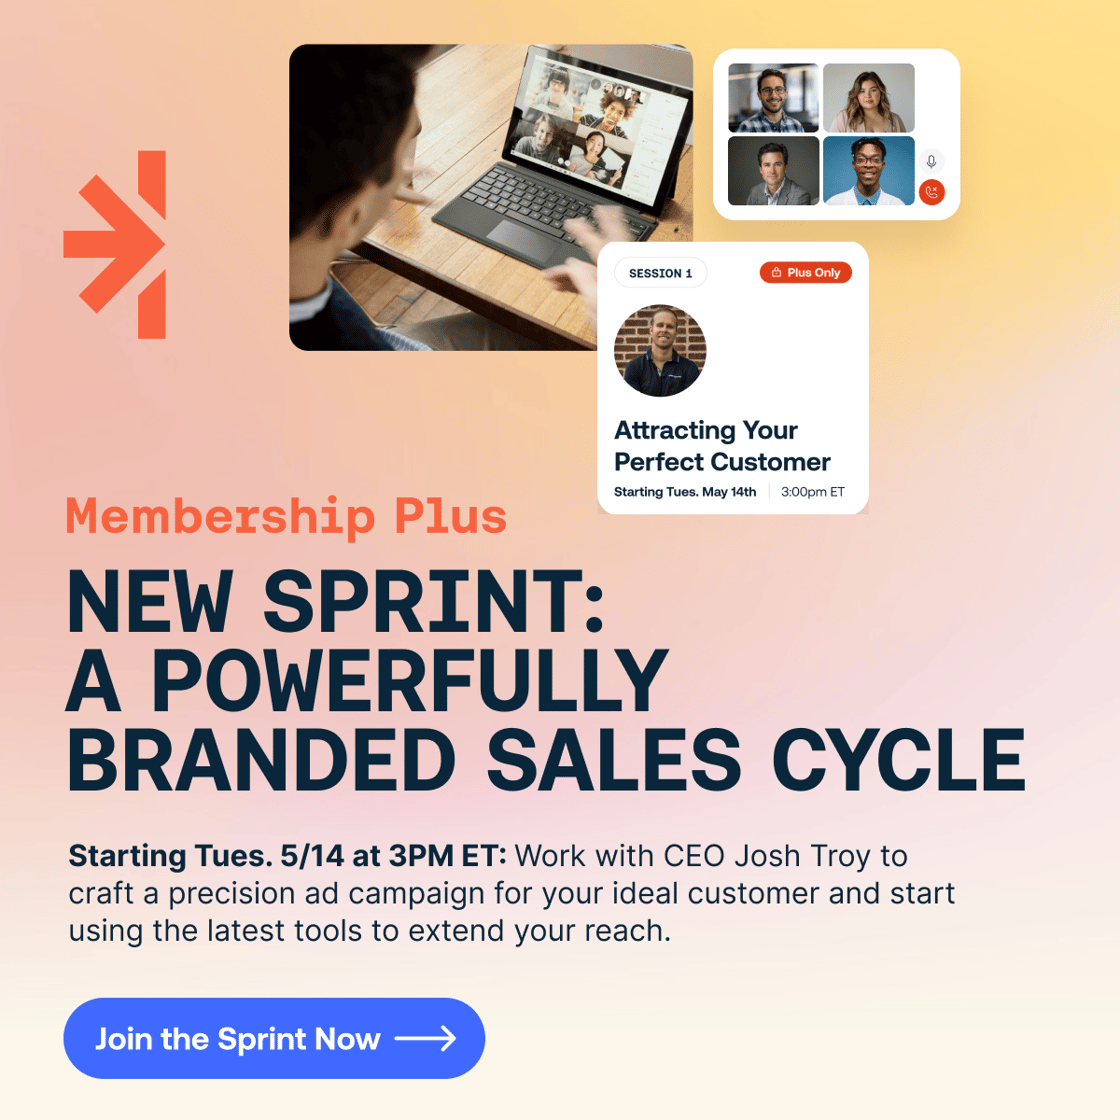 NEW SPRINT: A POWERFULLY BRANDED SALES CYCLE